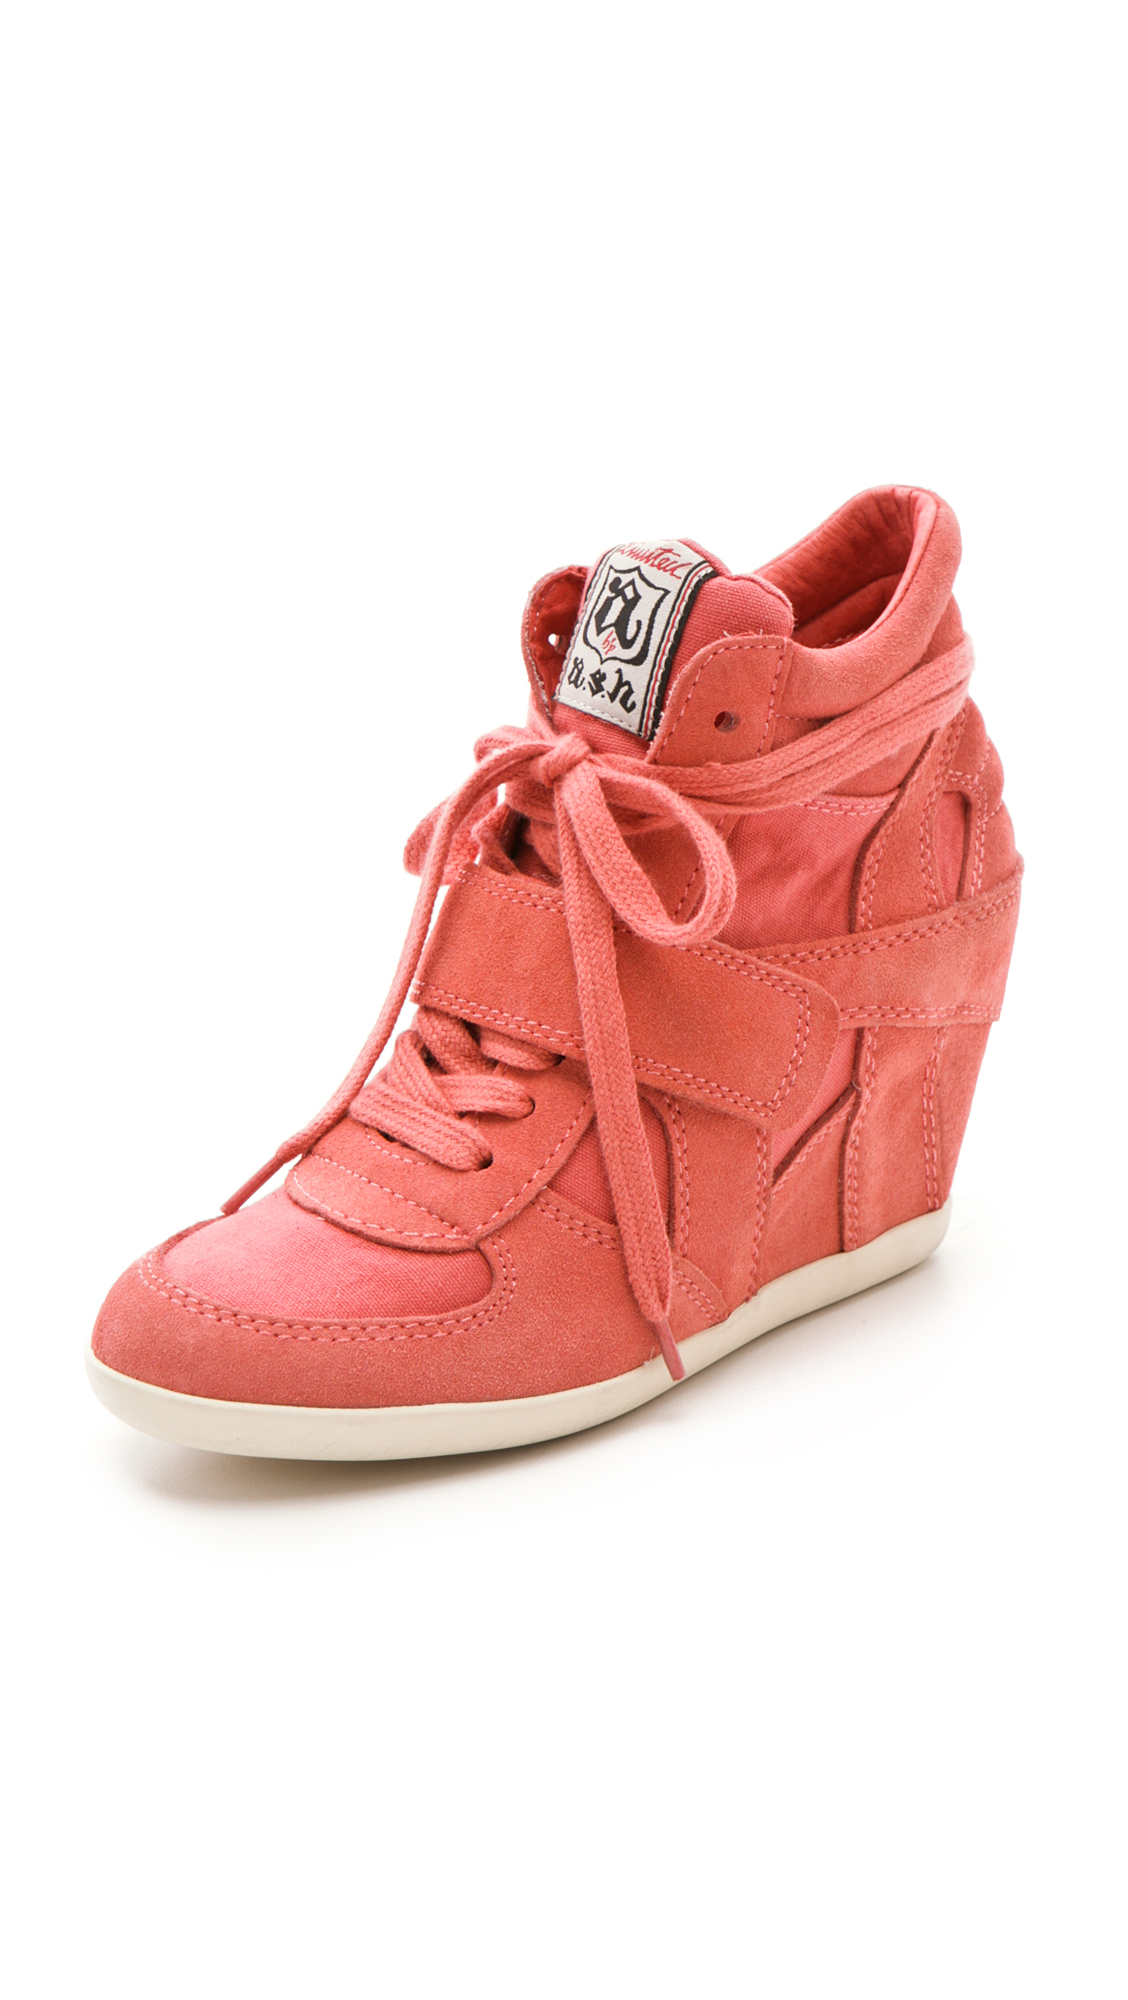 Ash Bowie Suede Wedge Sneakers with Canvas Insets in Peach (Red) - Lyst